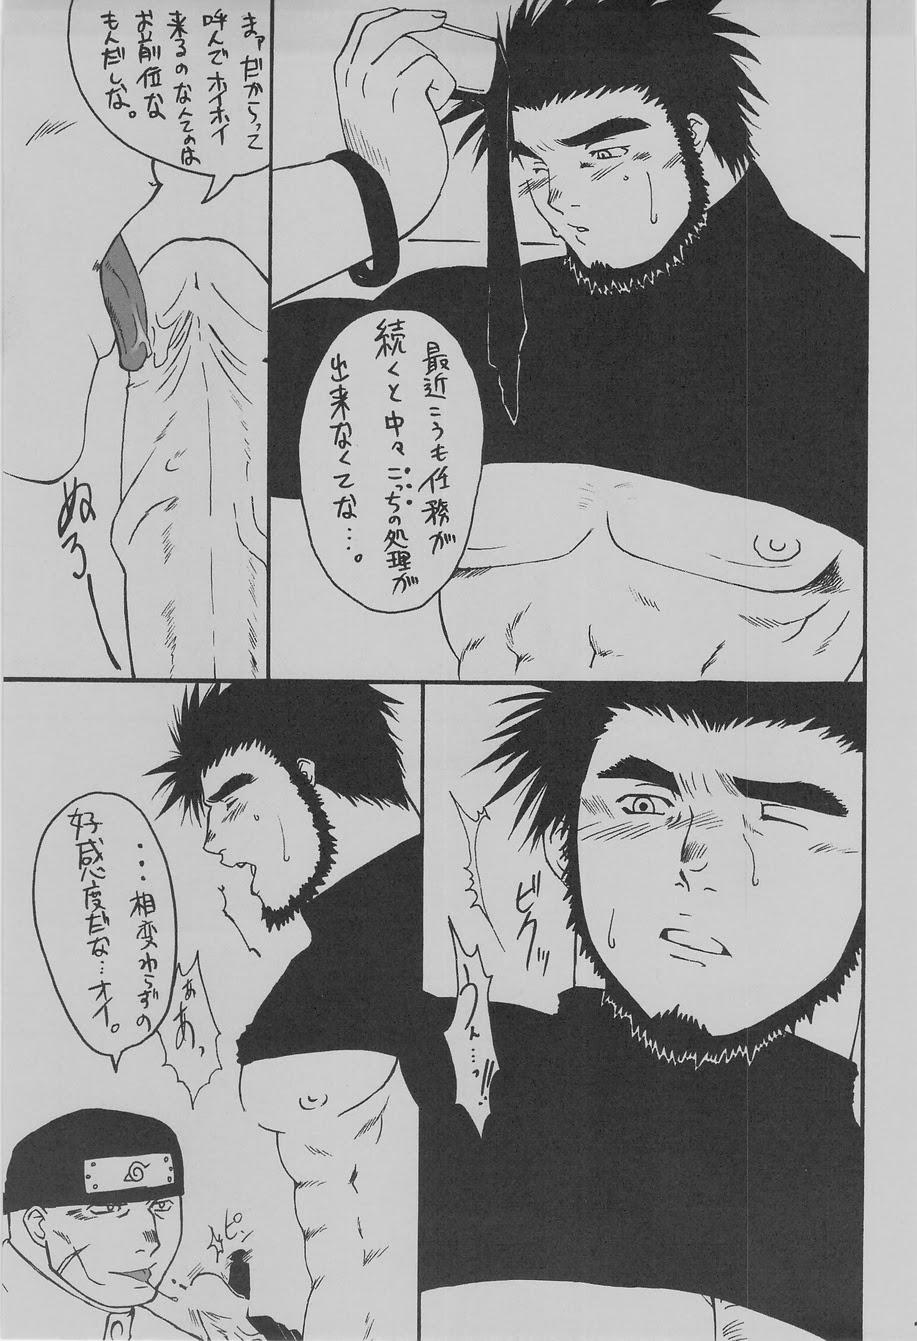 Amateurs Ka - it happened in the distant past - Naruto Fullmetal alchemist Gunparade march Teens - Page 13